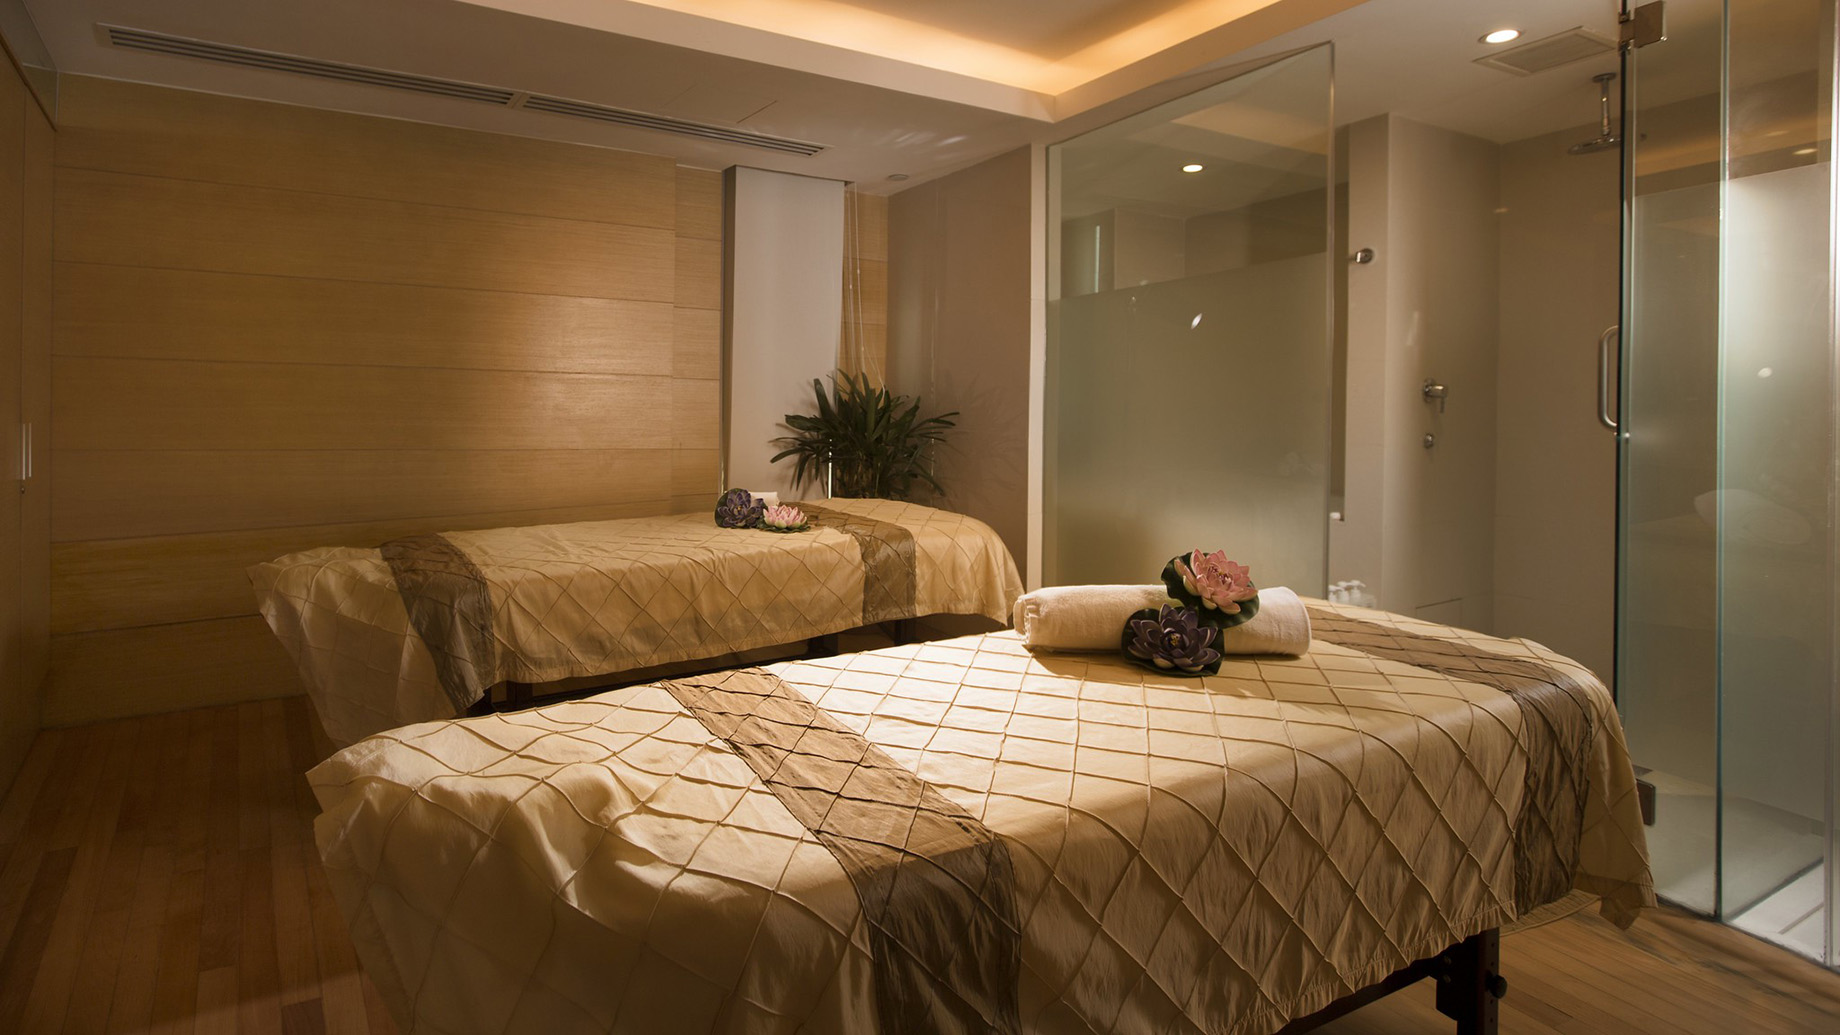 A spacious spa room at CHI, The Spa, that communicates the feeling of soothing relaxation.